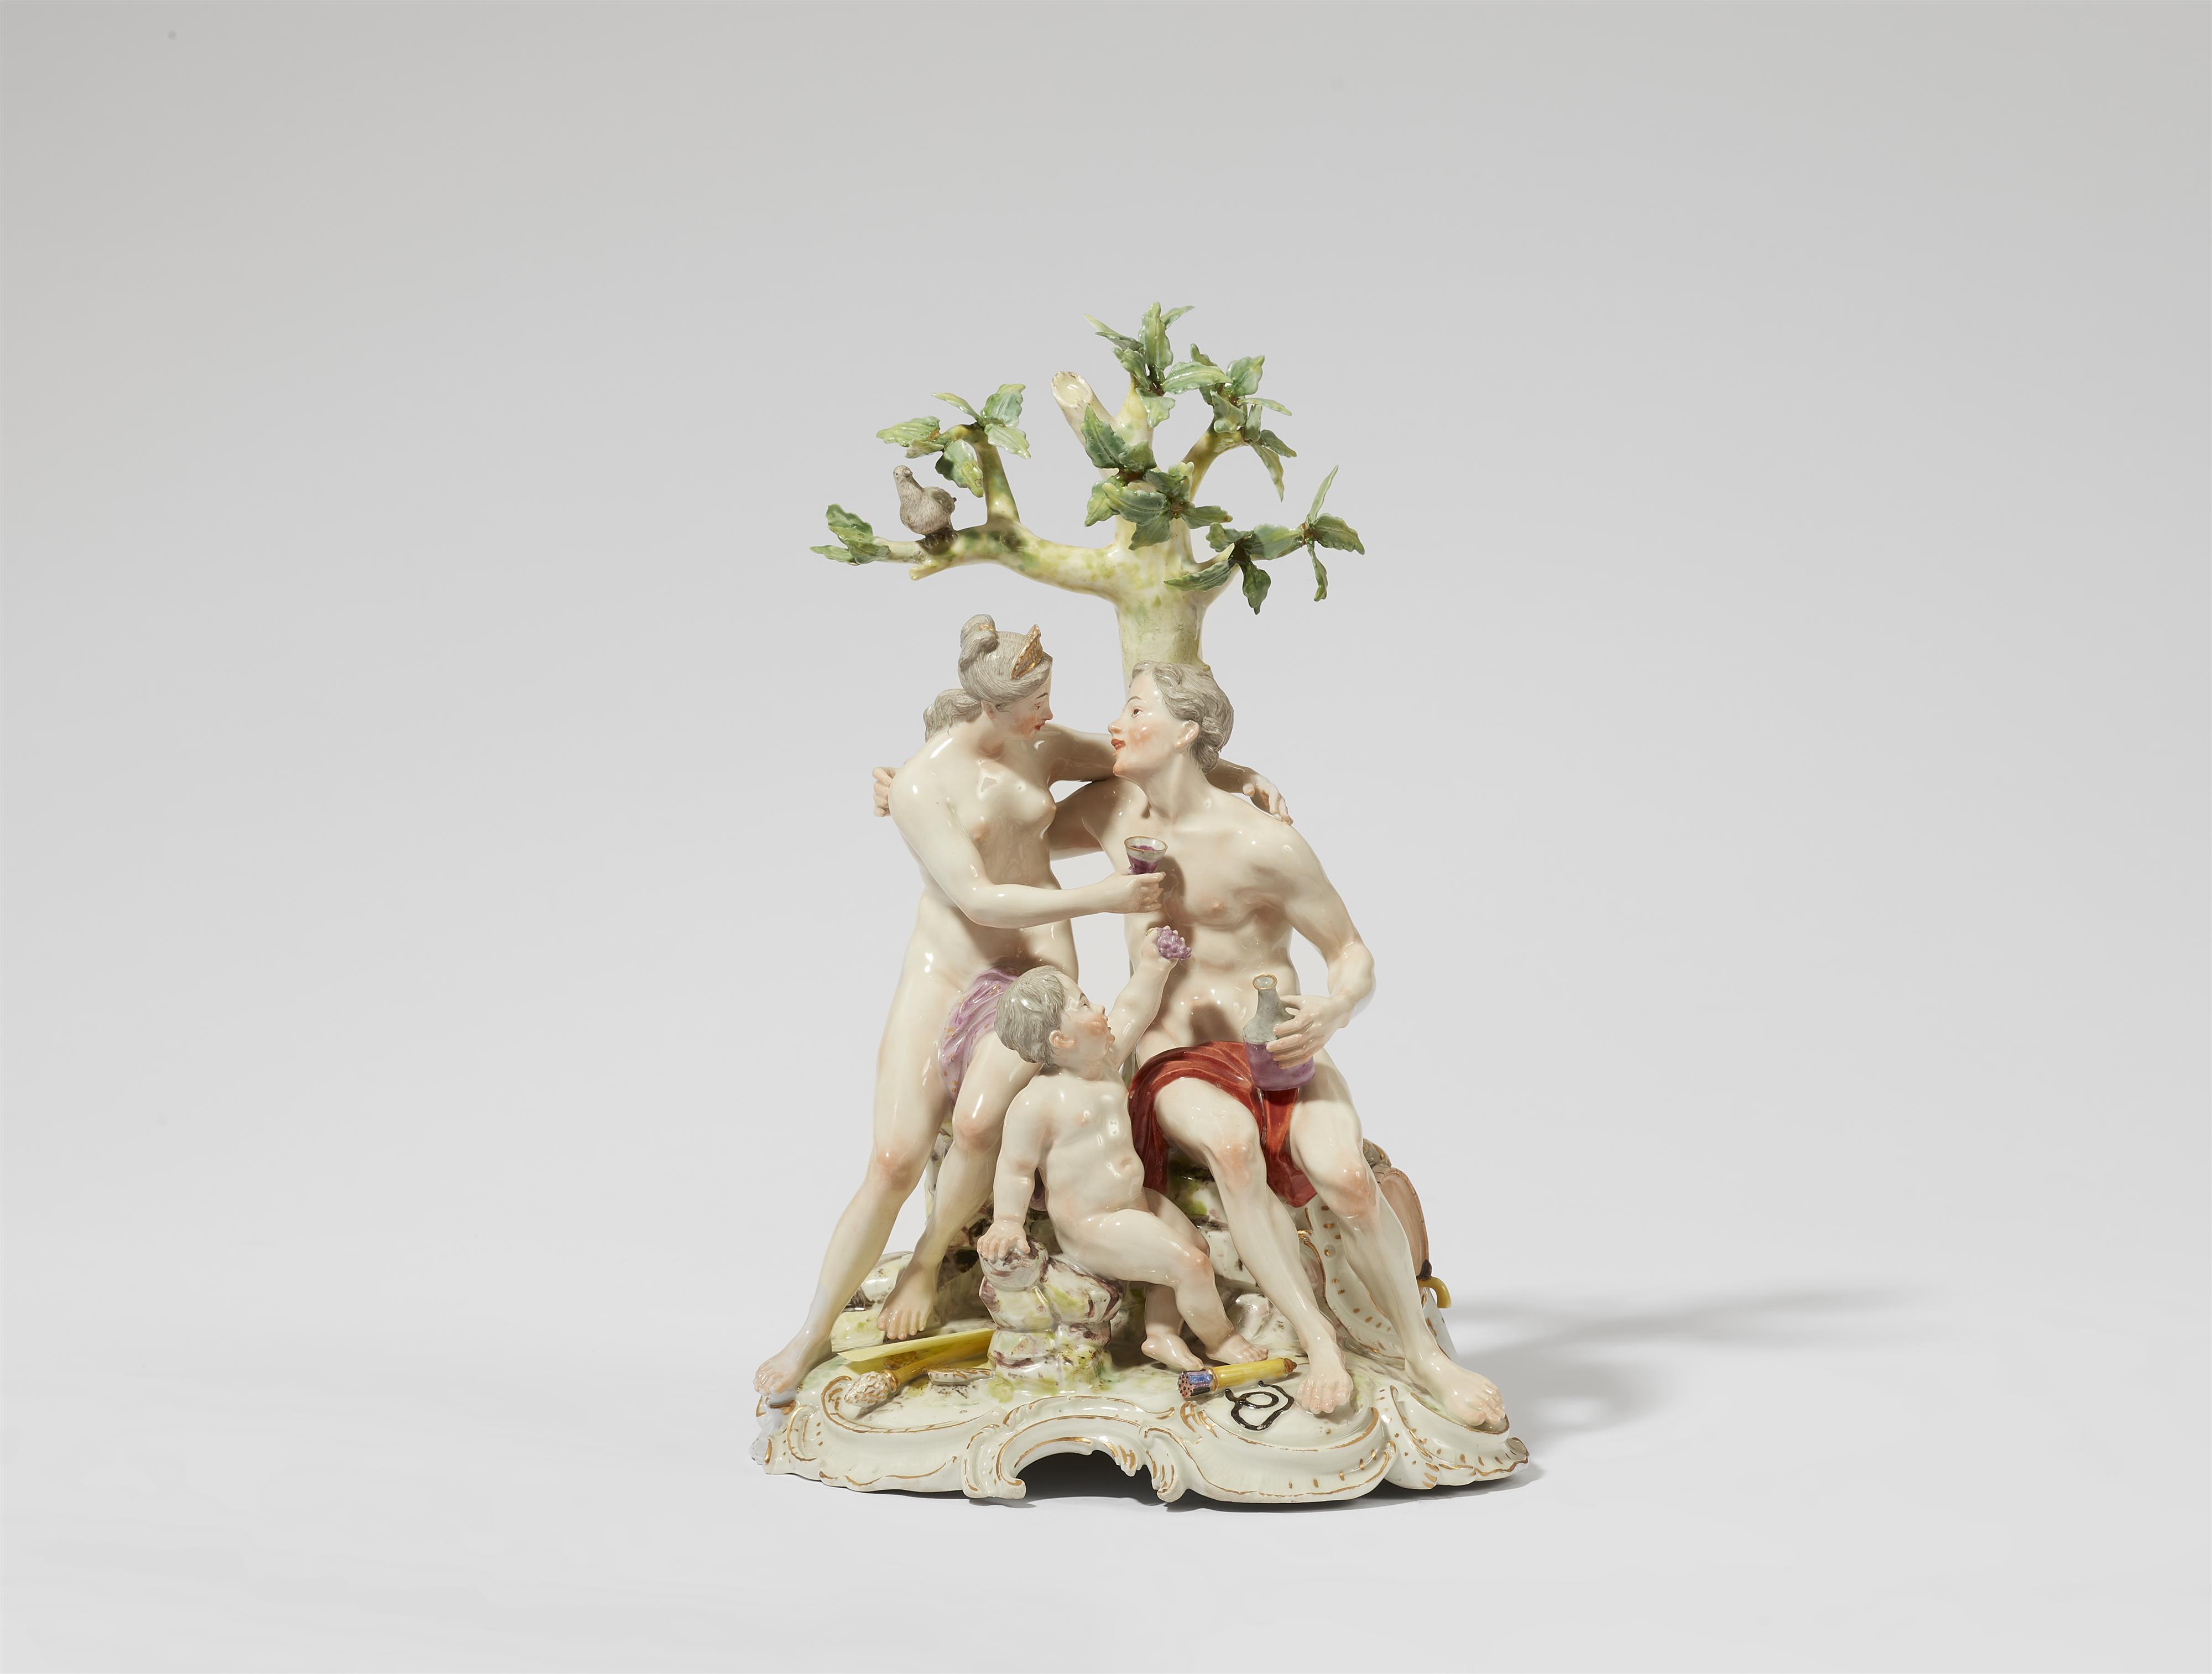 A rare Ludwigsburg porcelain group with Venus, Bacchus and Cupid - image-1